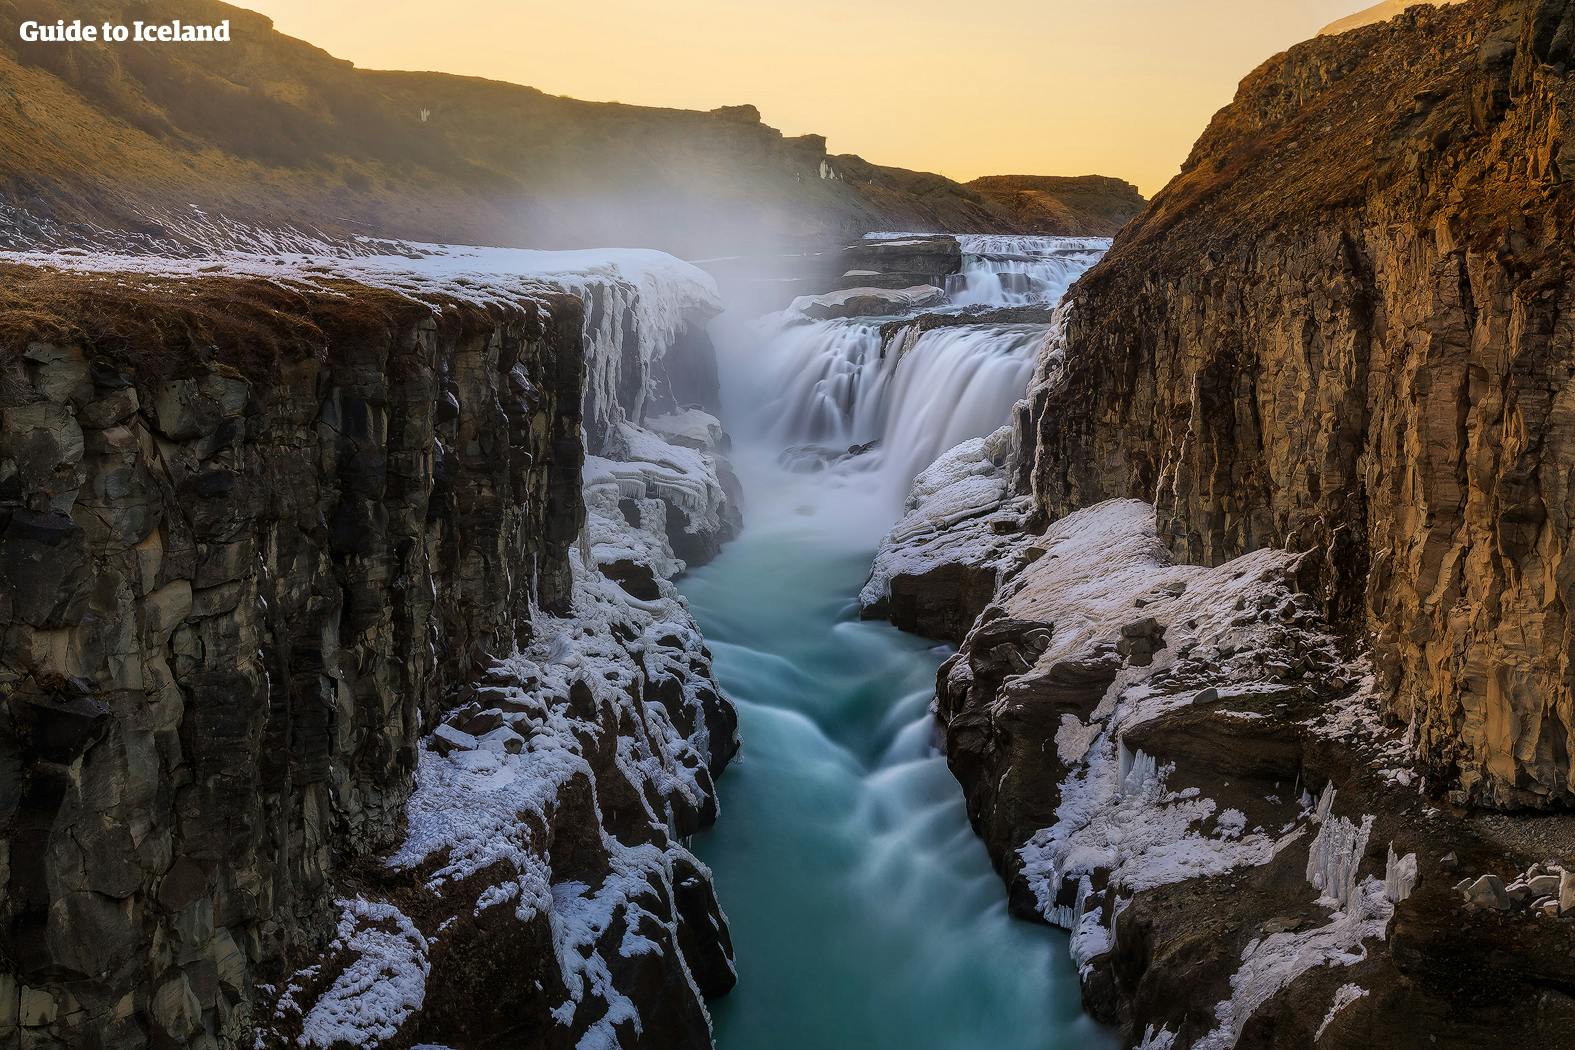 The valley that Gullfoss falls into becomes snow-coated as winter takes hold of south Iceland.